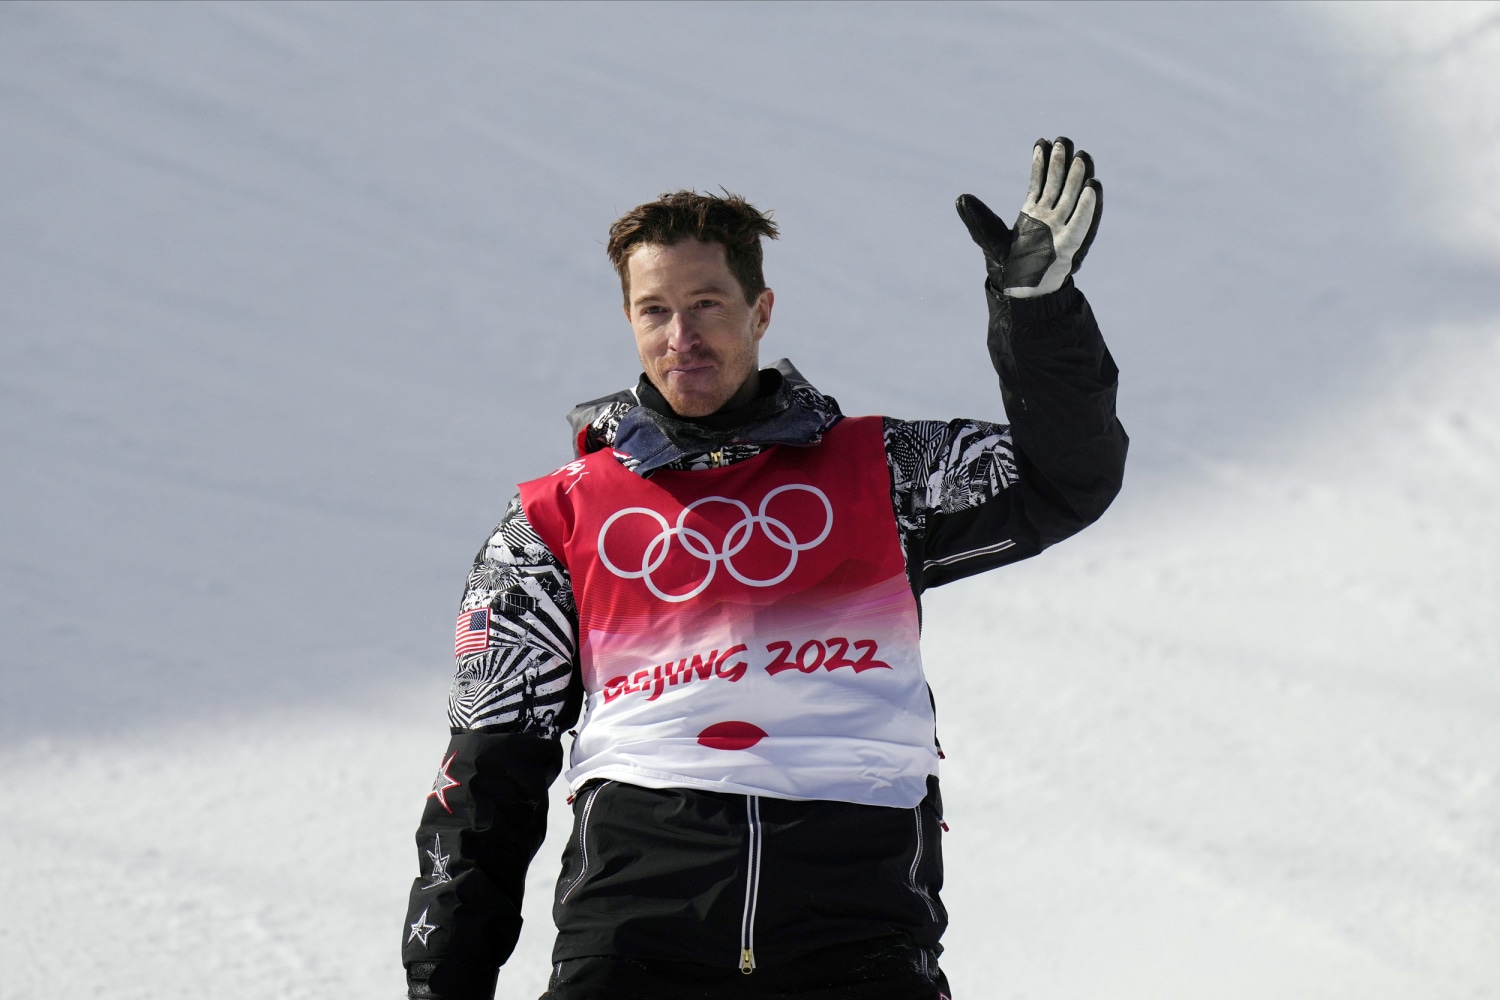 Current Twitter trends:Shaun White, 'my top subjects